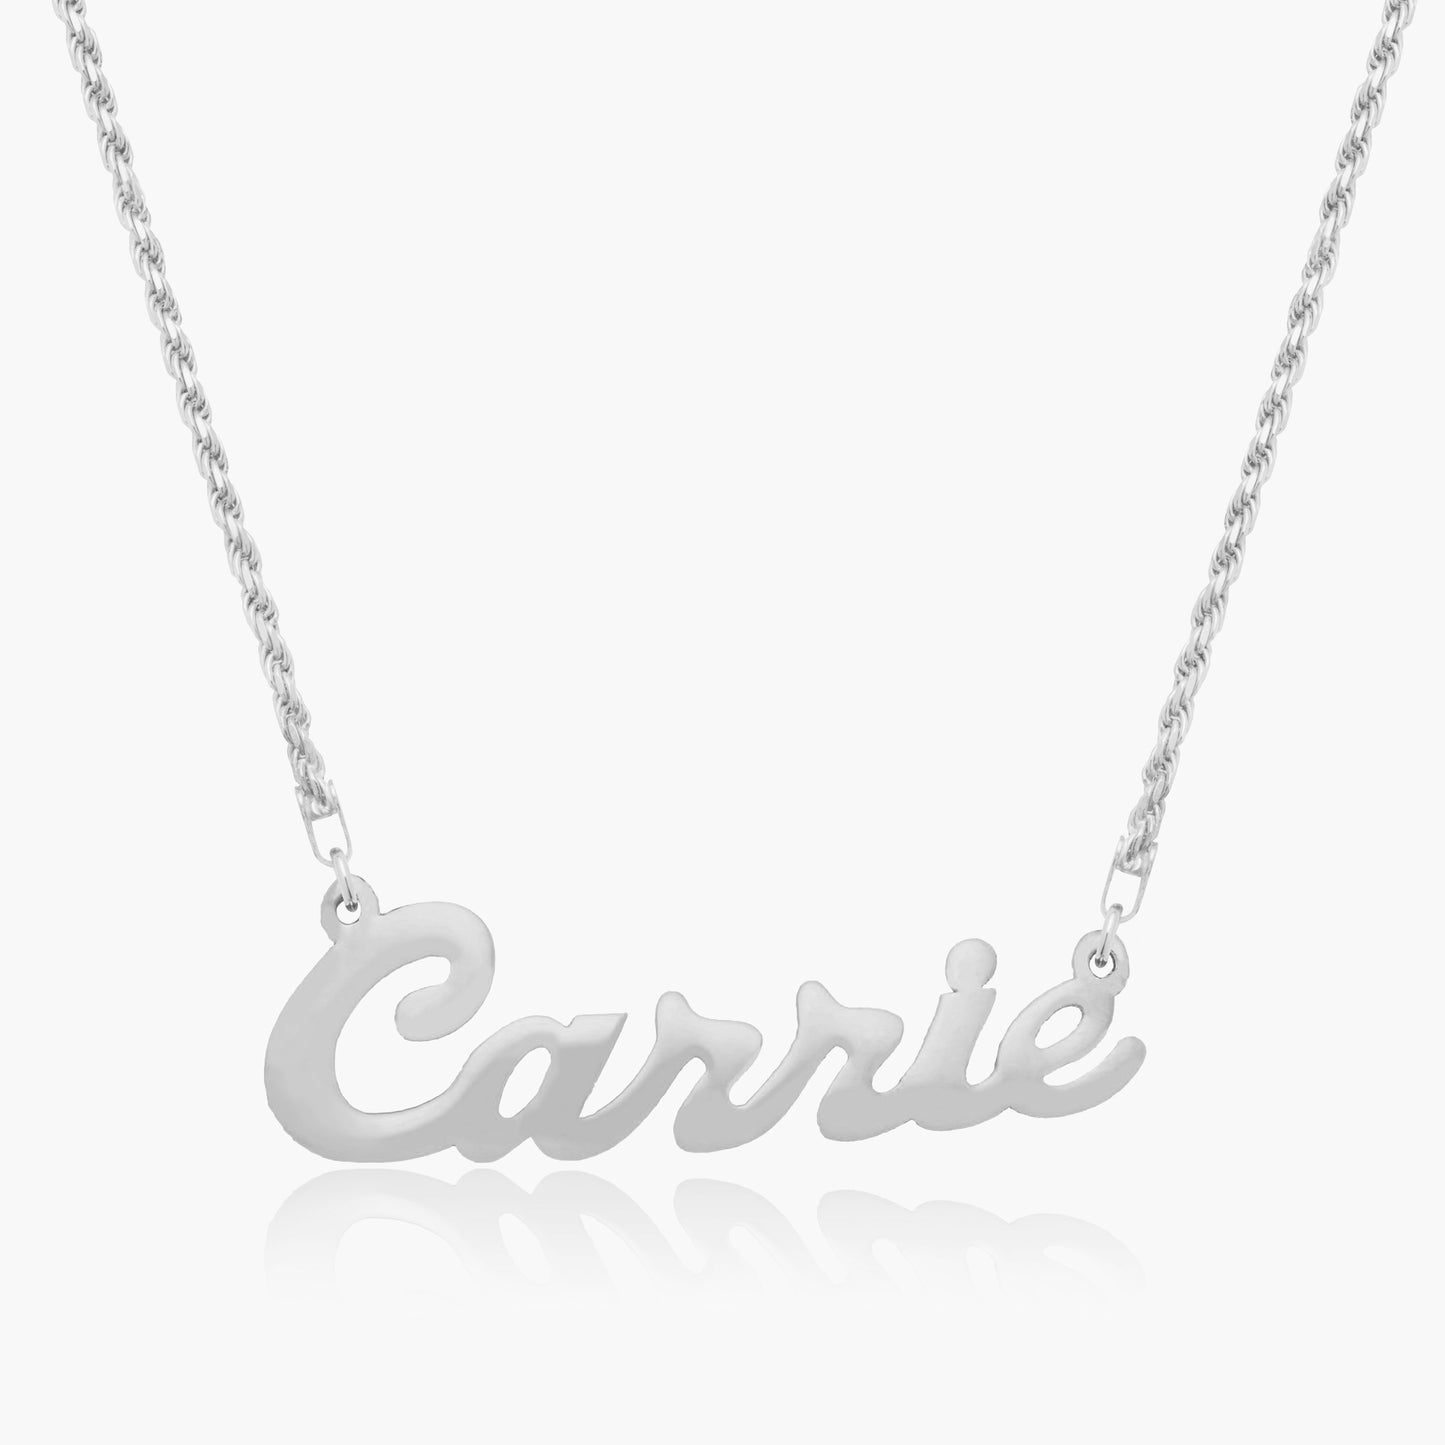 "Carrie" Name Necklace